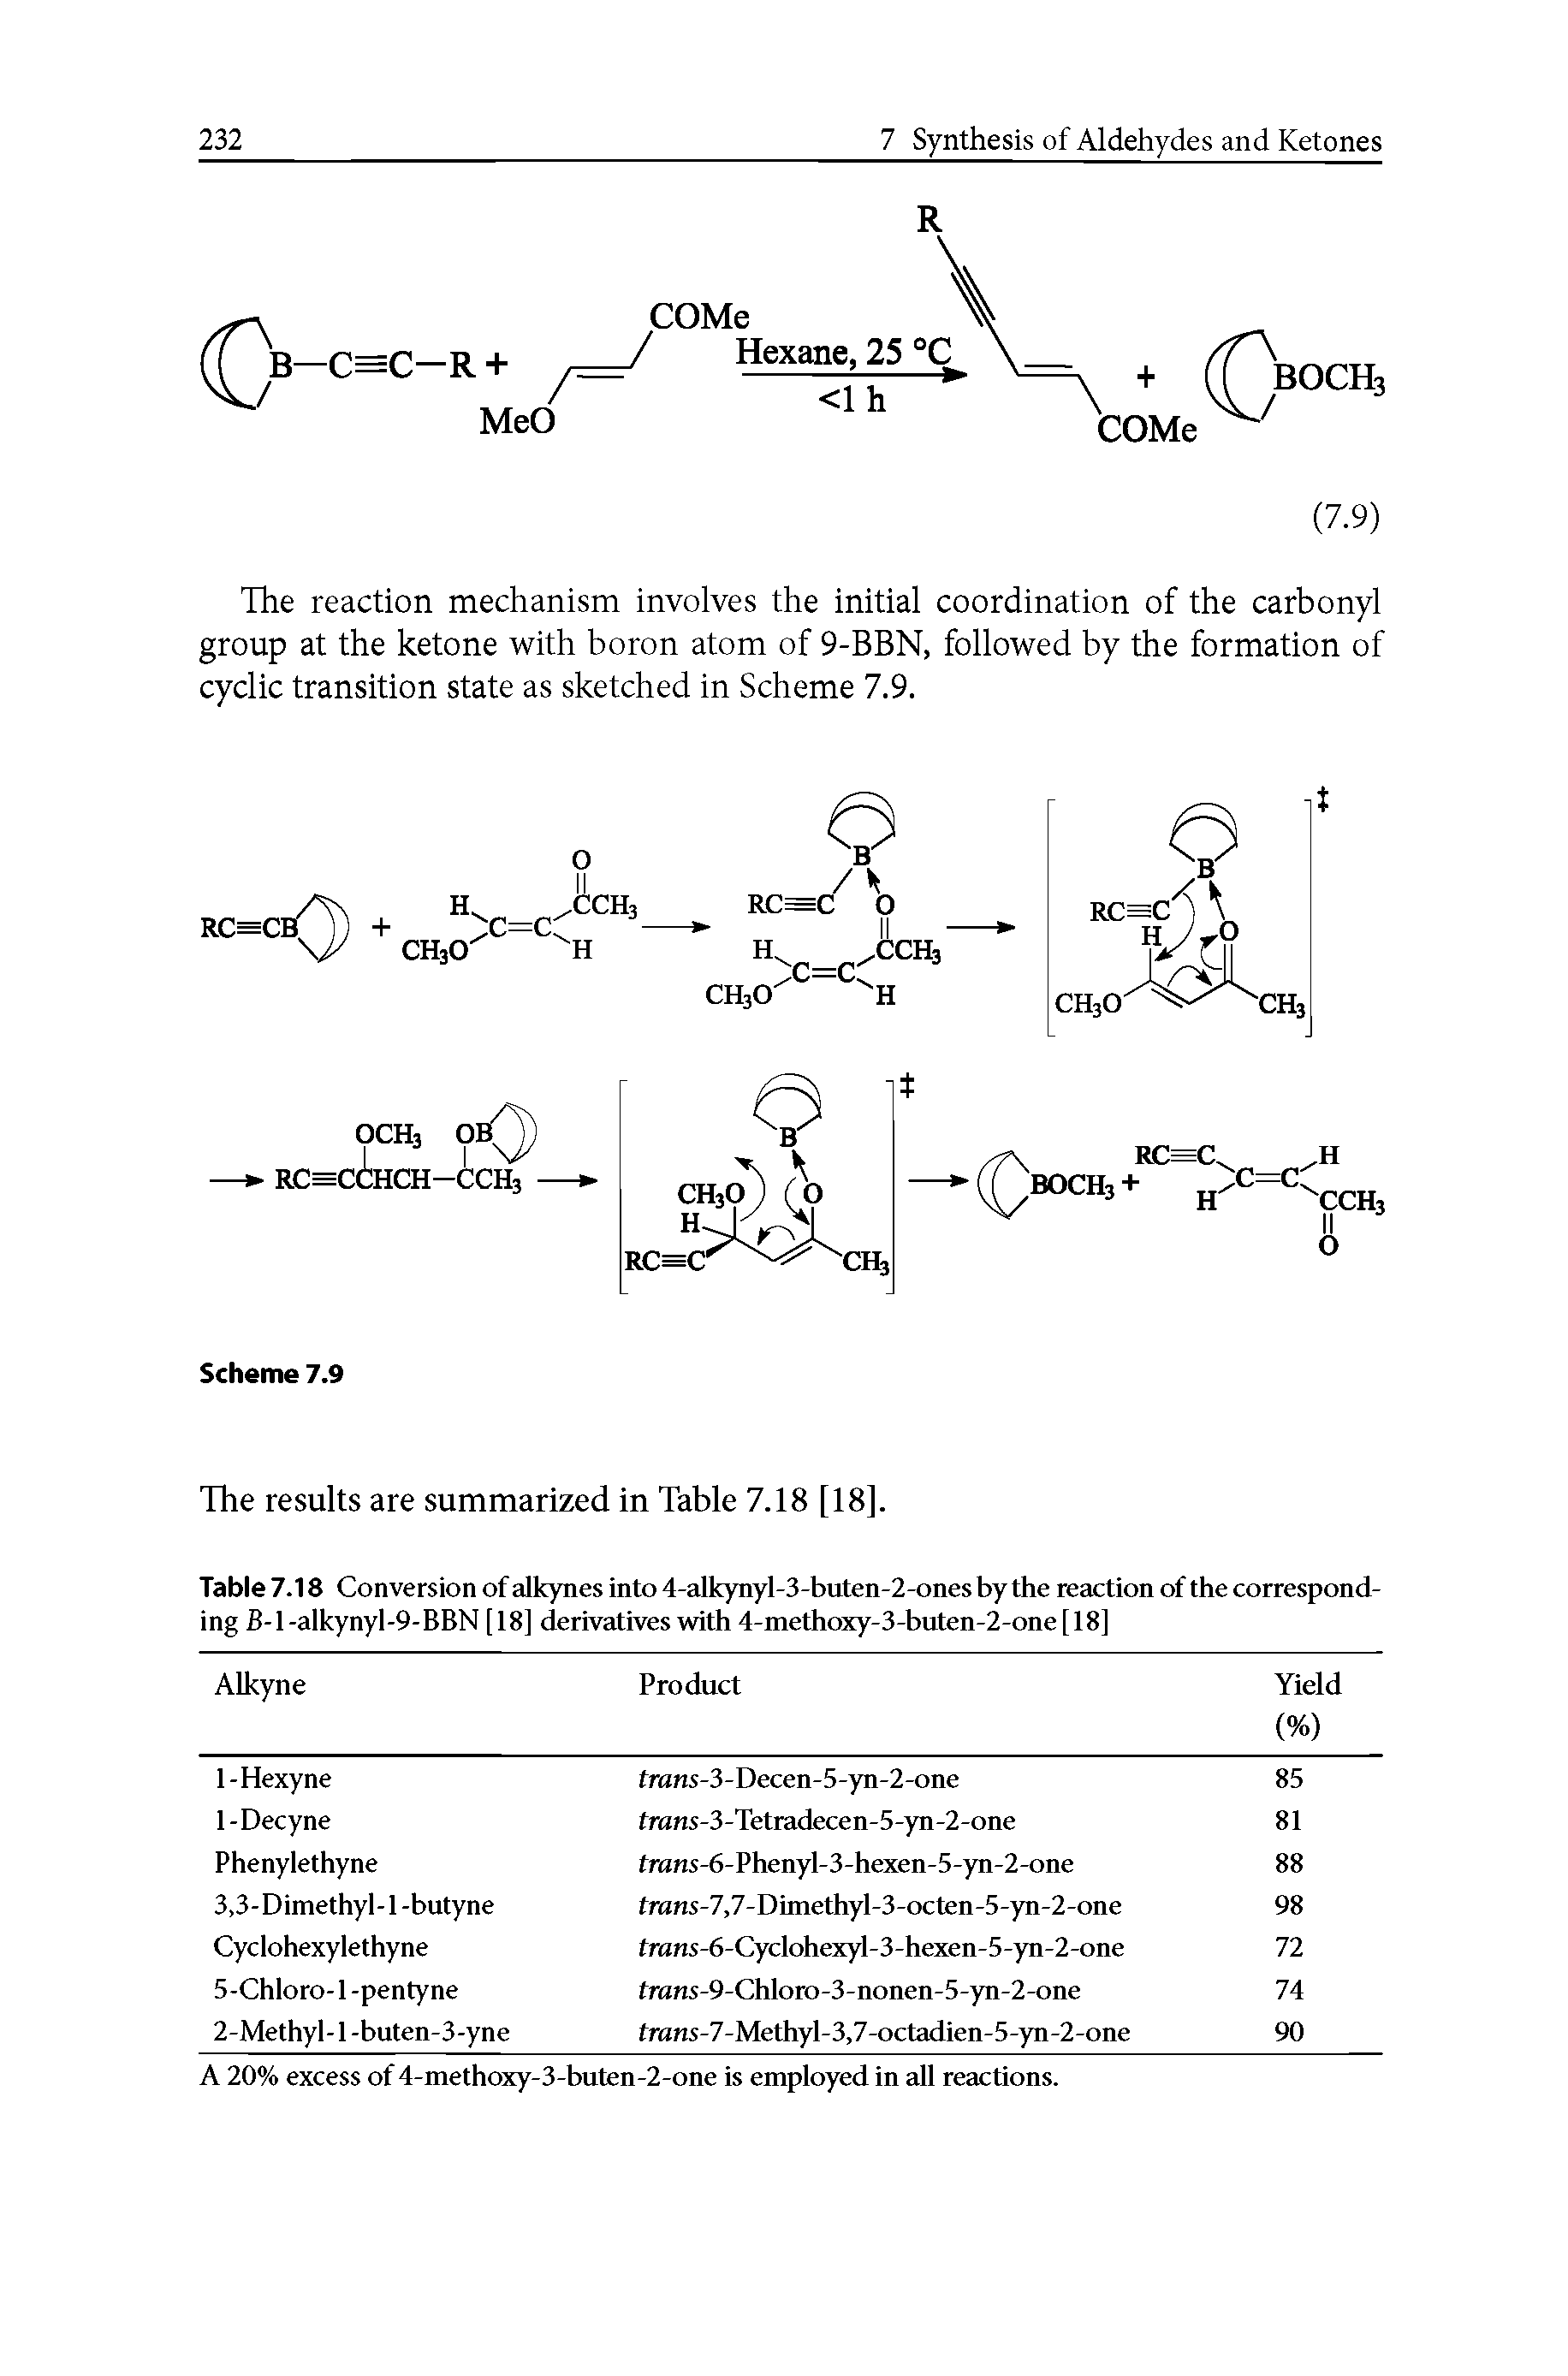 Table 7.18 Conversion of alkynes into 4-alkynyl-3-buten-2-ones by the reaction of the corresponding B-l-alkynyl-9-BBN [18] derivatives with 4-methoxy-3-buten-2-one[18]...